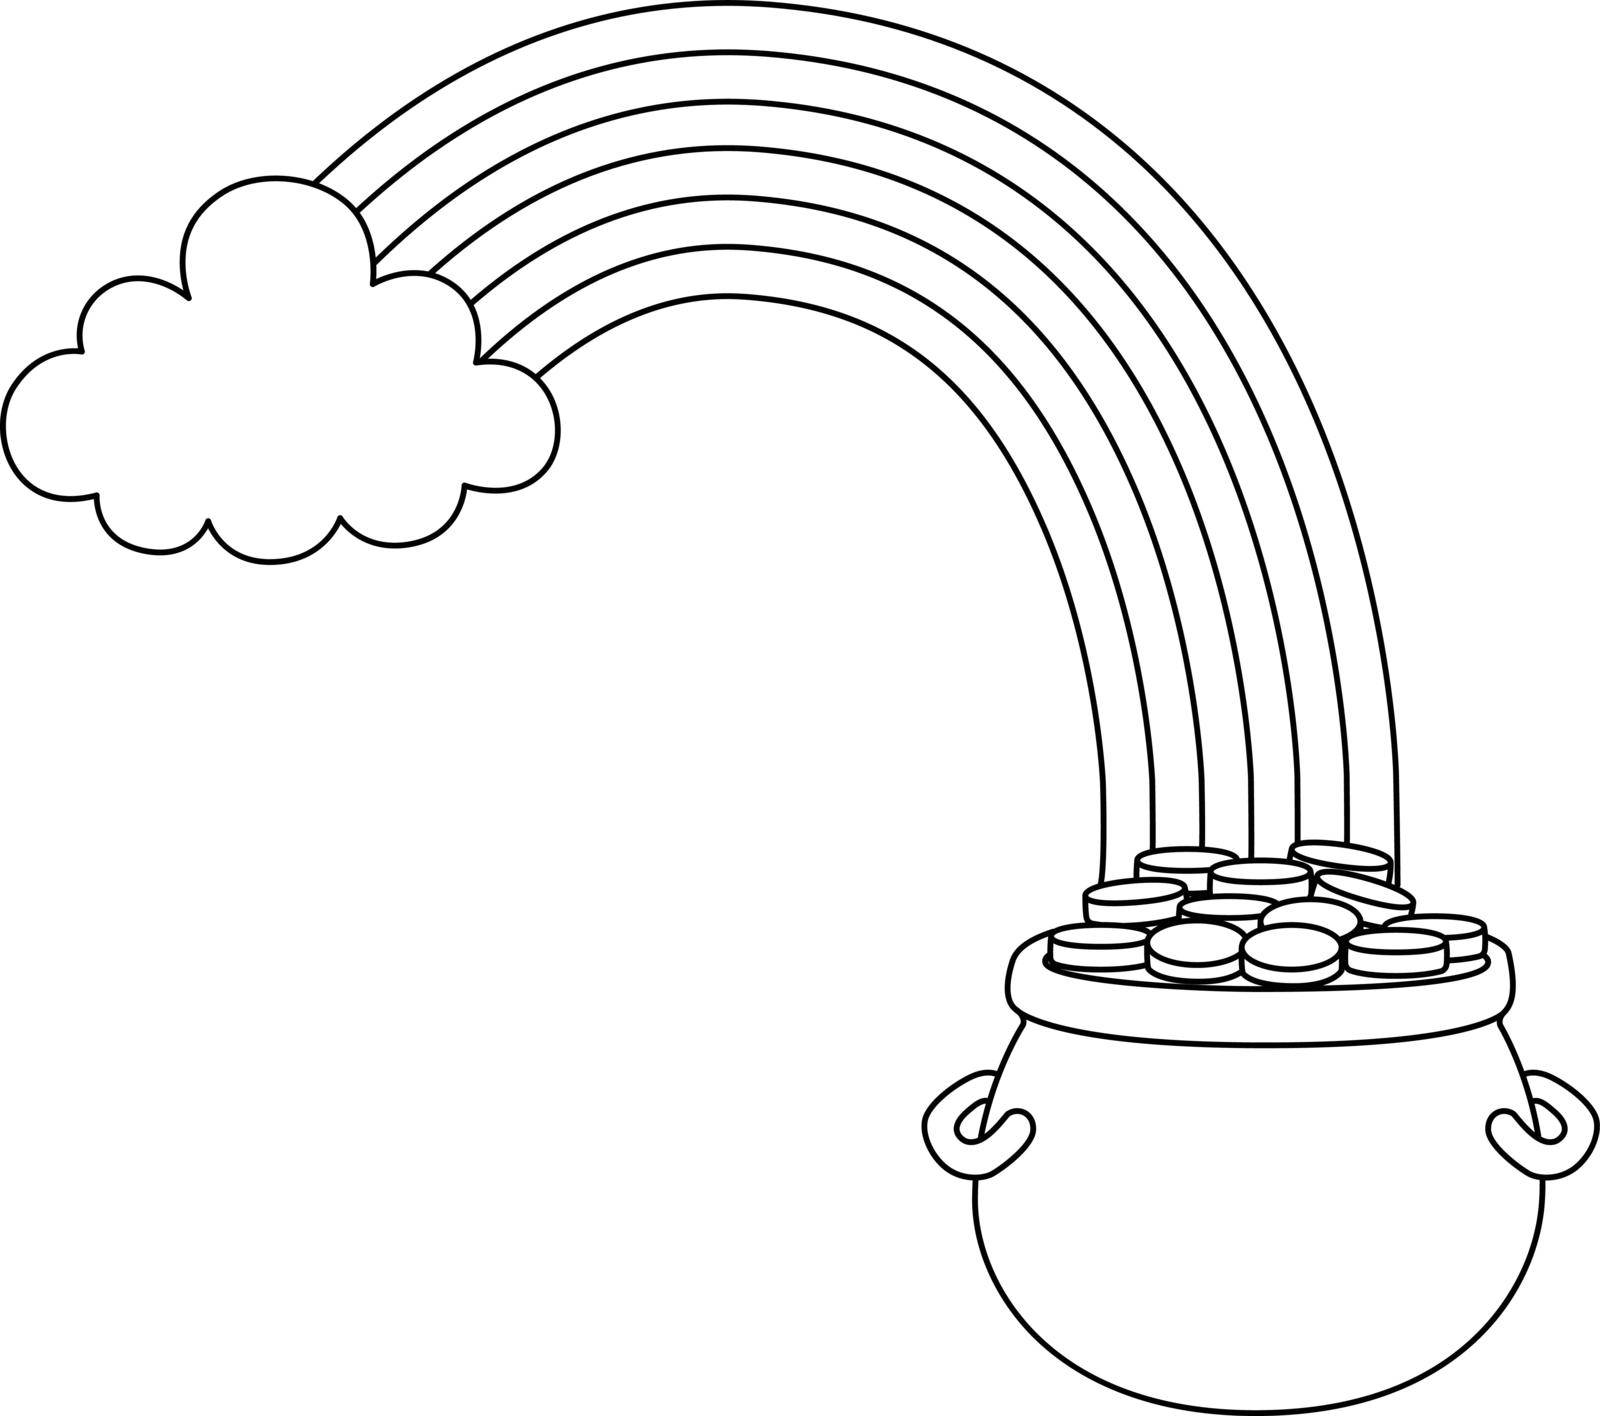 A cute and funny coloring page of a St. Patricks Day rainbow pot of gold. Provides hours of coloring fun for children. To color, this page is very easy. Suitable for little kids and toddlers.